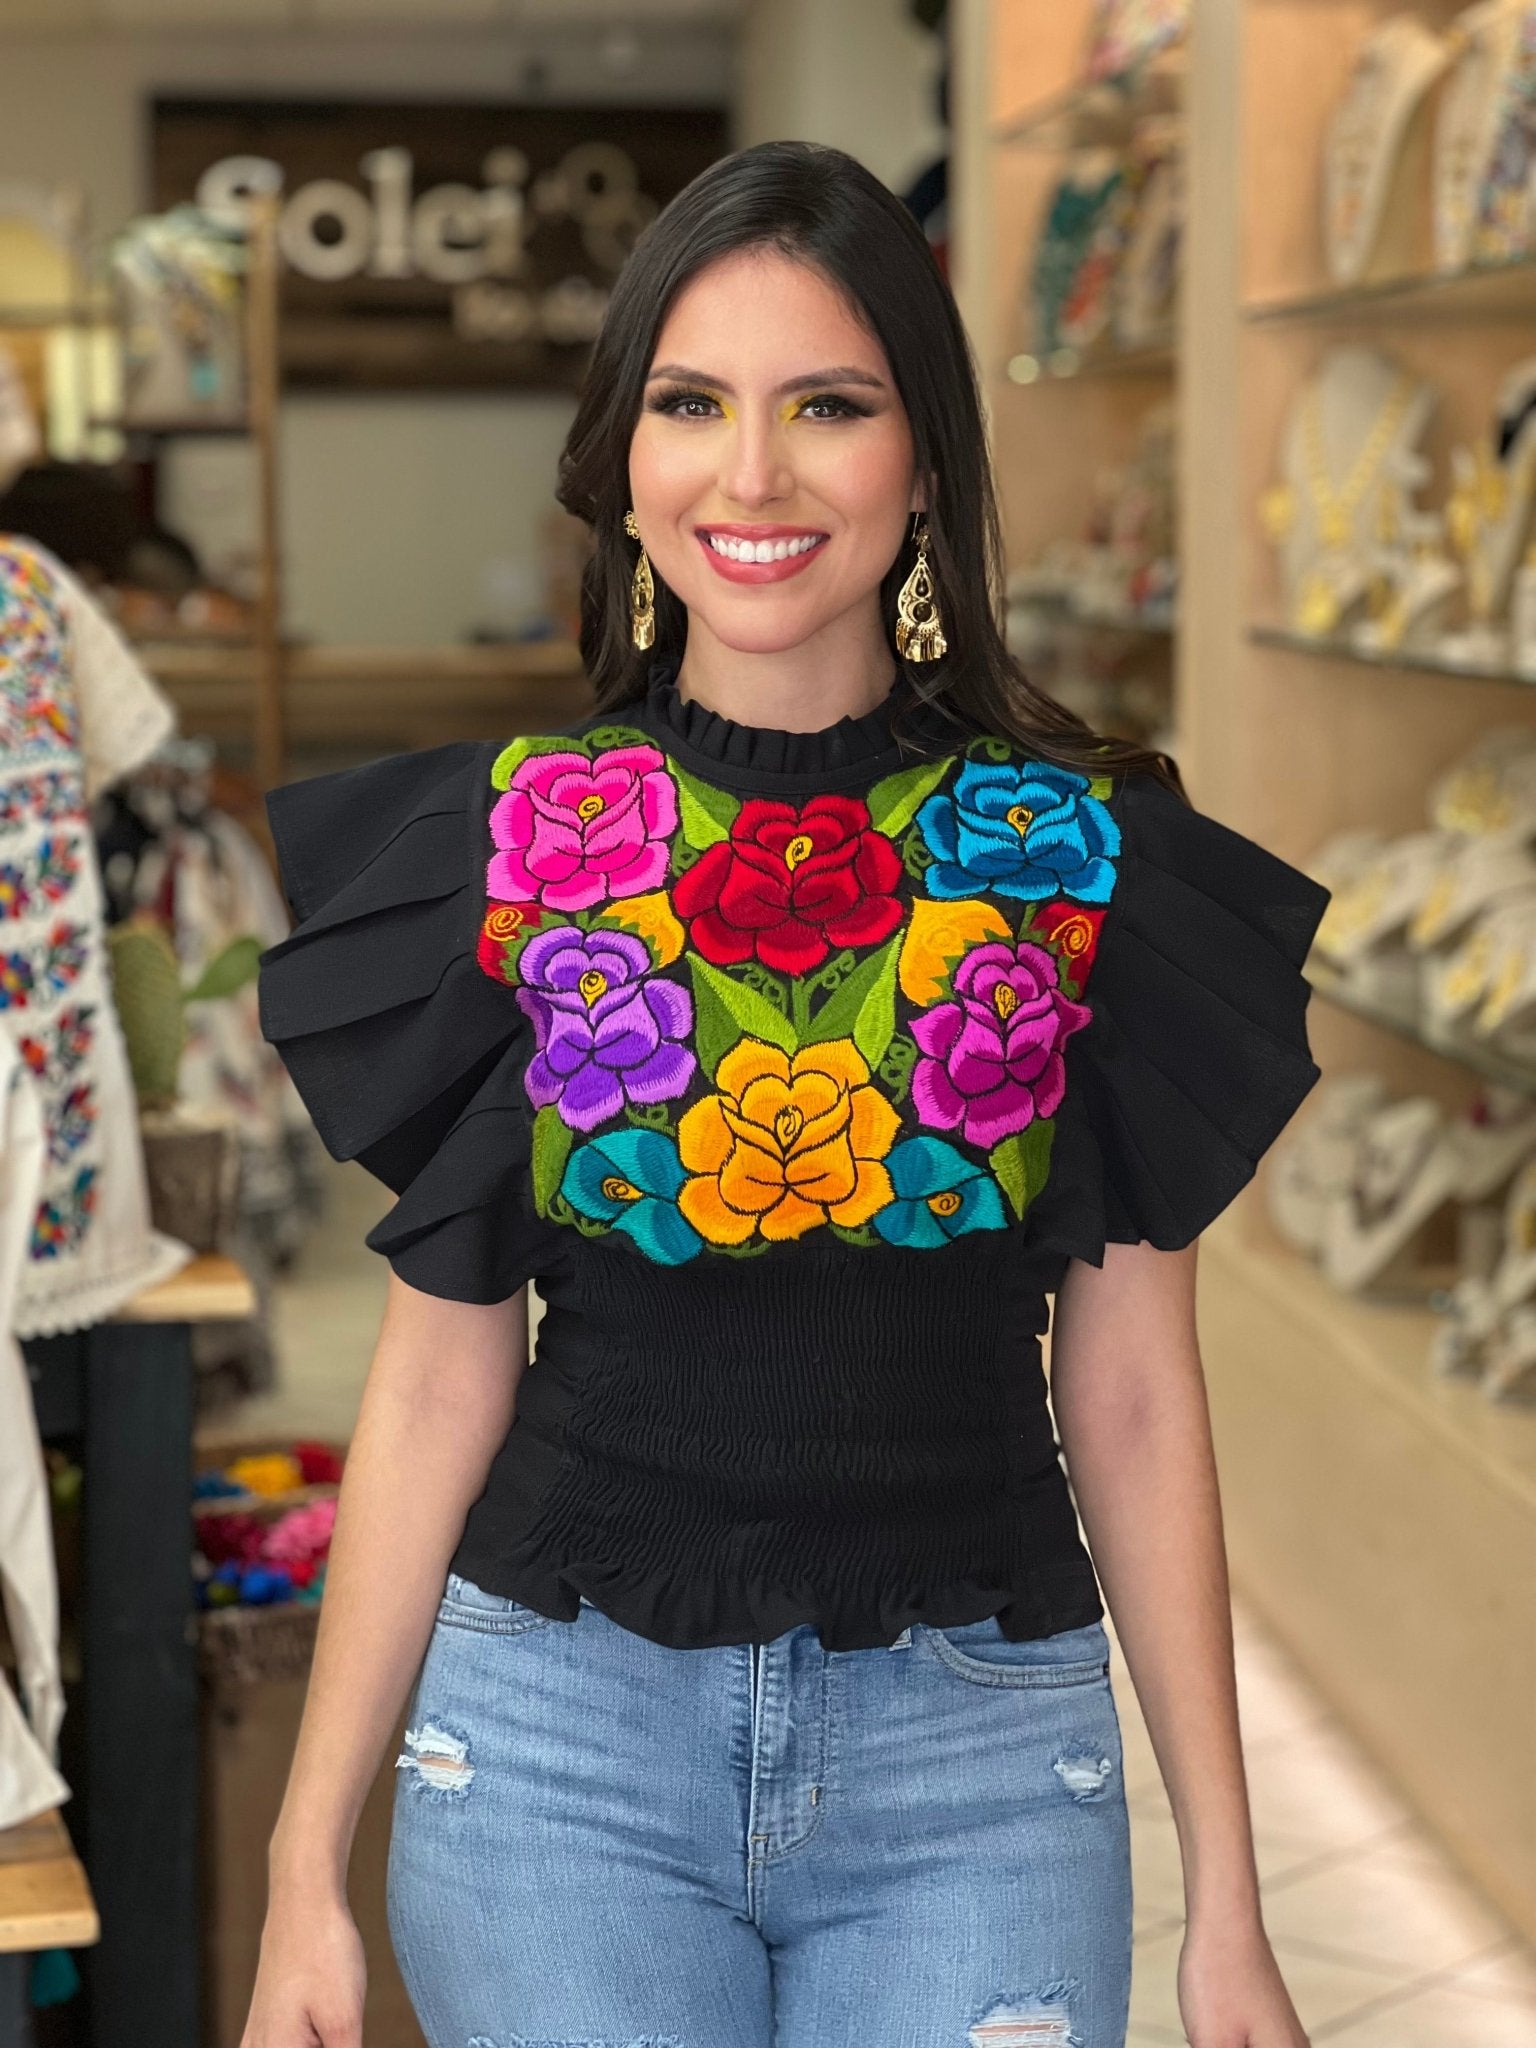 Floral Embroidered Butterfly Sleeve Top. Ursula Zinacatan Blouse. - Solei Store